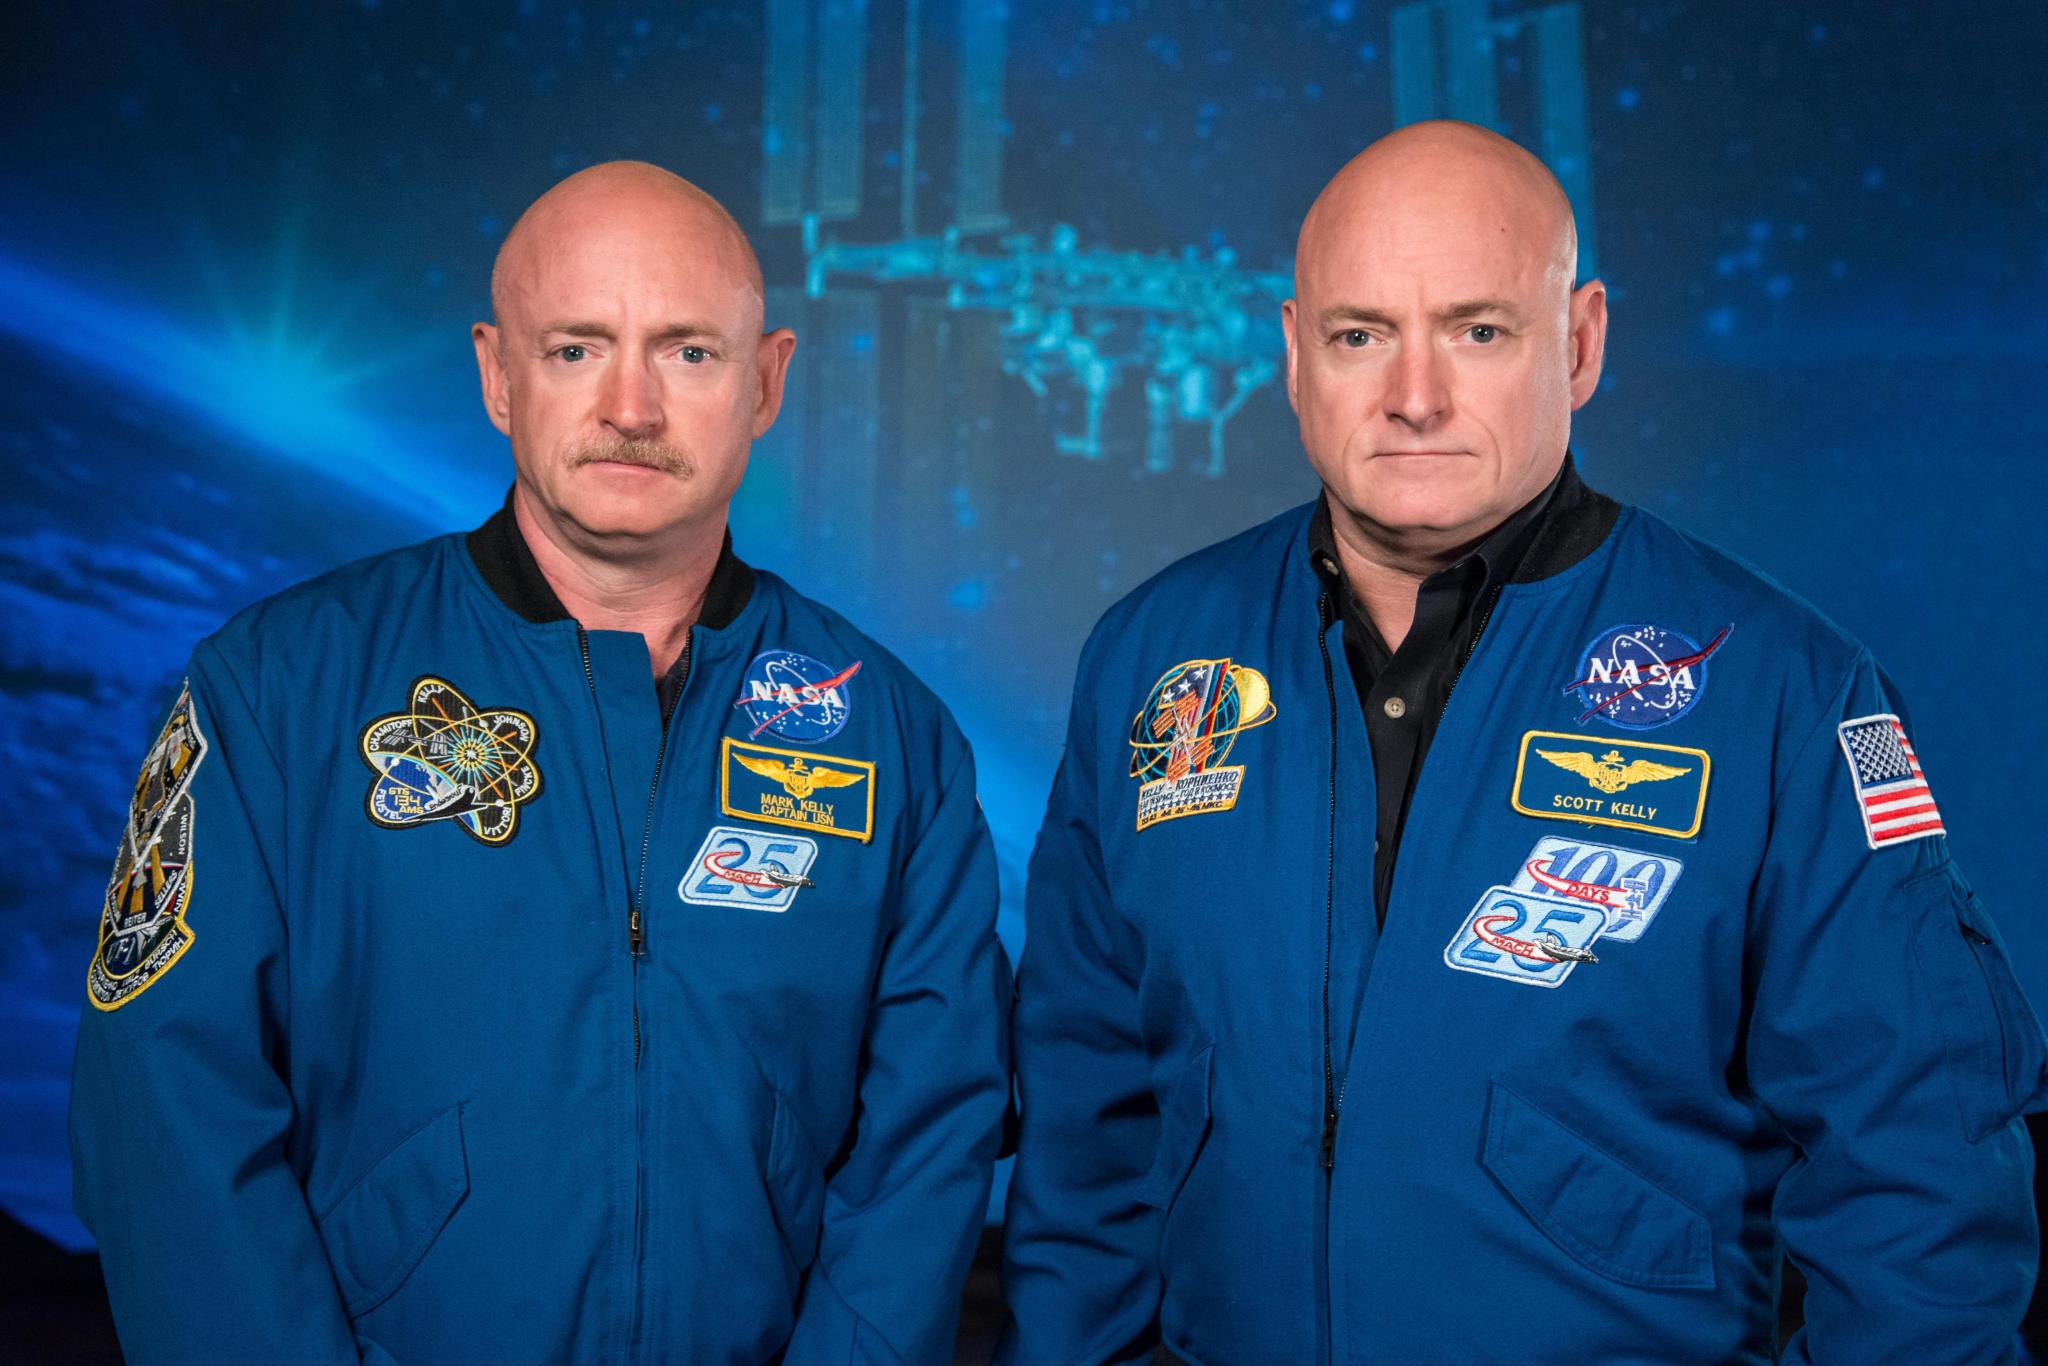 Retired NASA astronauts, and identical twins, Mark and Scott Kelly